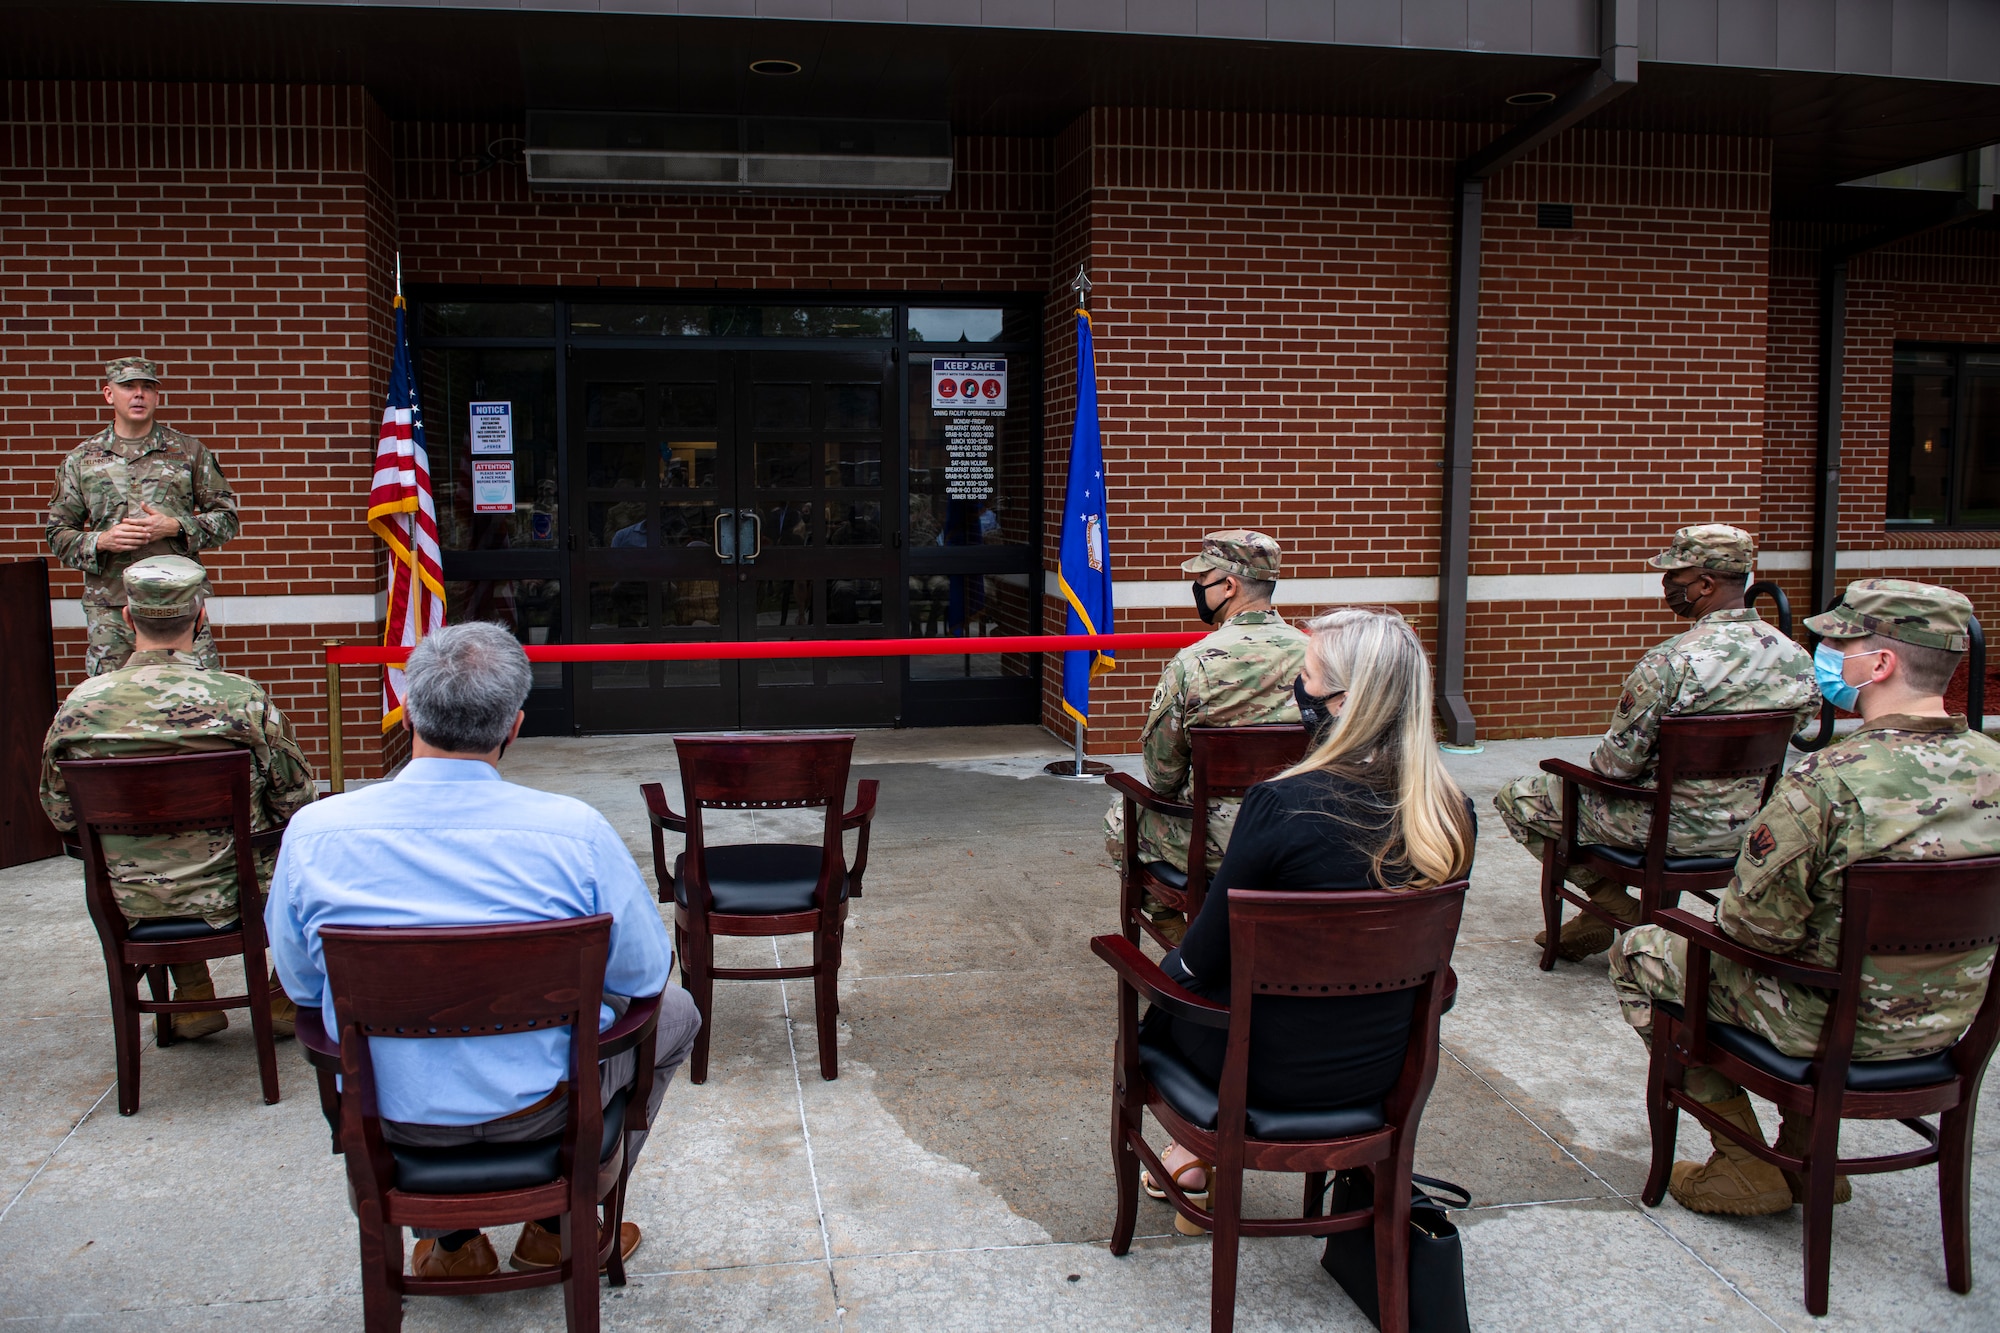 The Southern Eagle Dining Facility at Seymour Johnson Air Force Base has re-opened after two years of renovations.